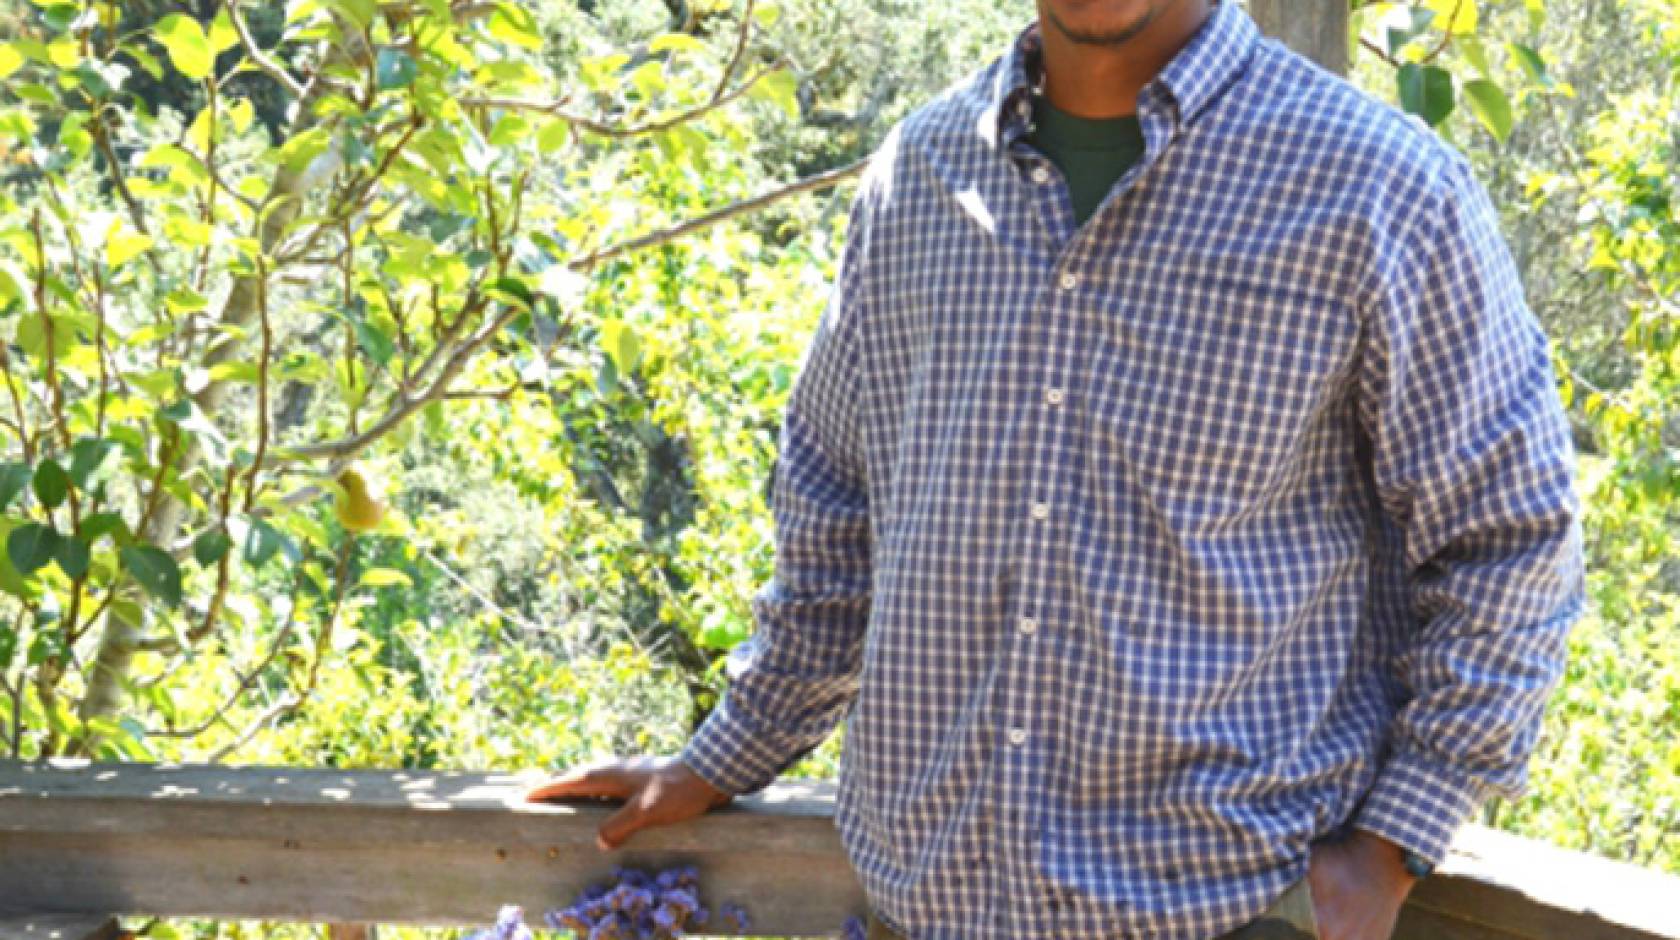 U.S. Army veteran James Harris, an apprentice at the UC Santa Cruz Farm, finds working the soil is another way to serve. Harris joined the Army at age 19 after the 9/11 attacks.